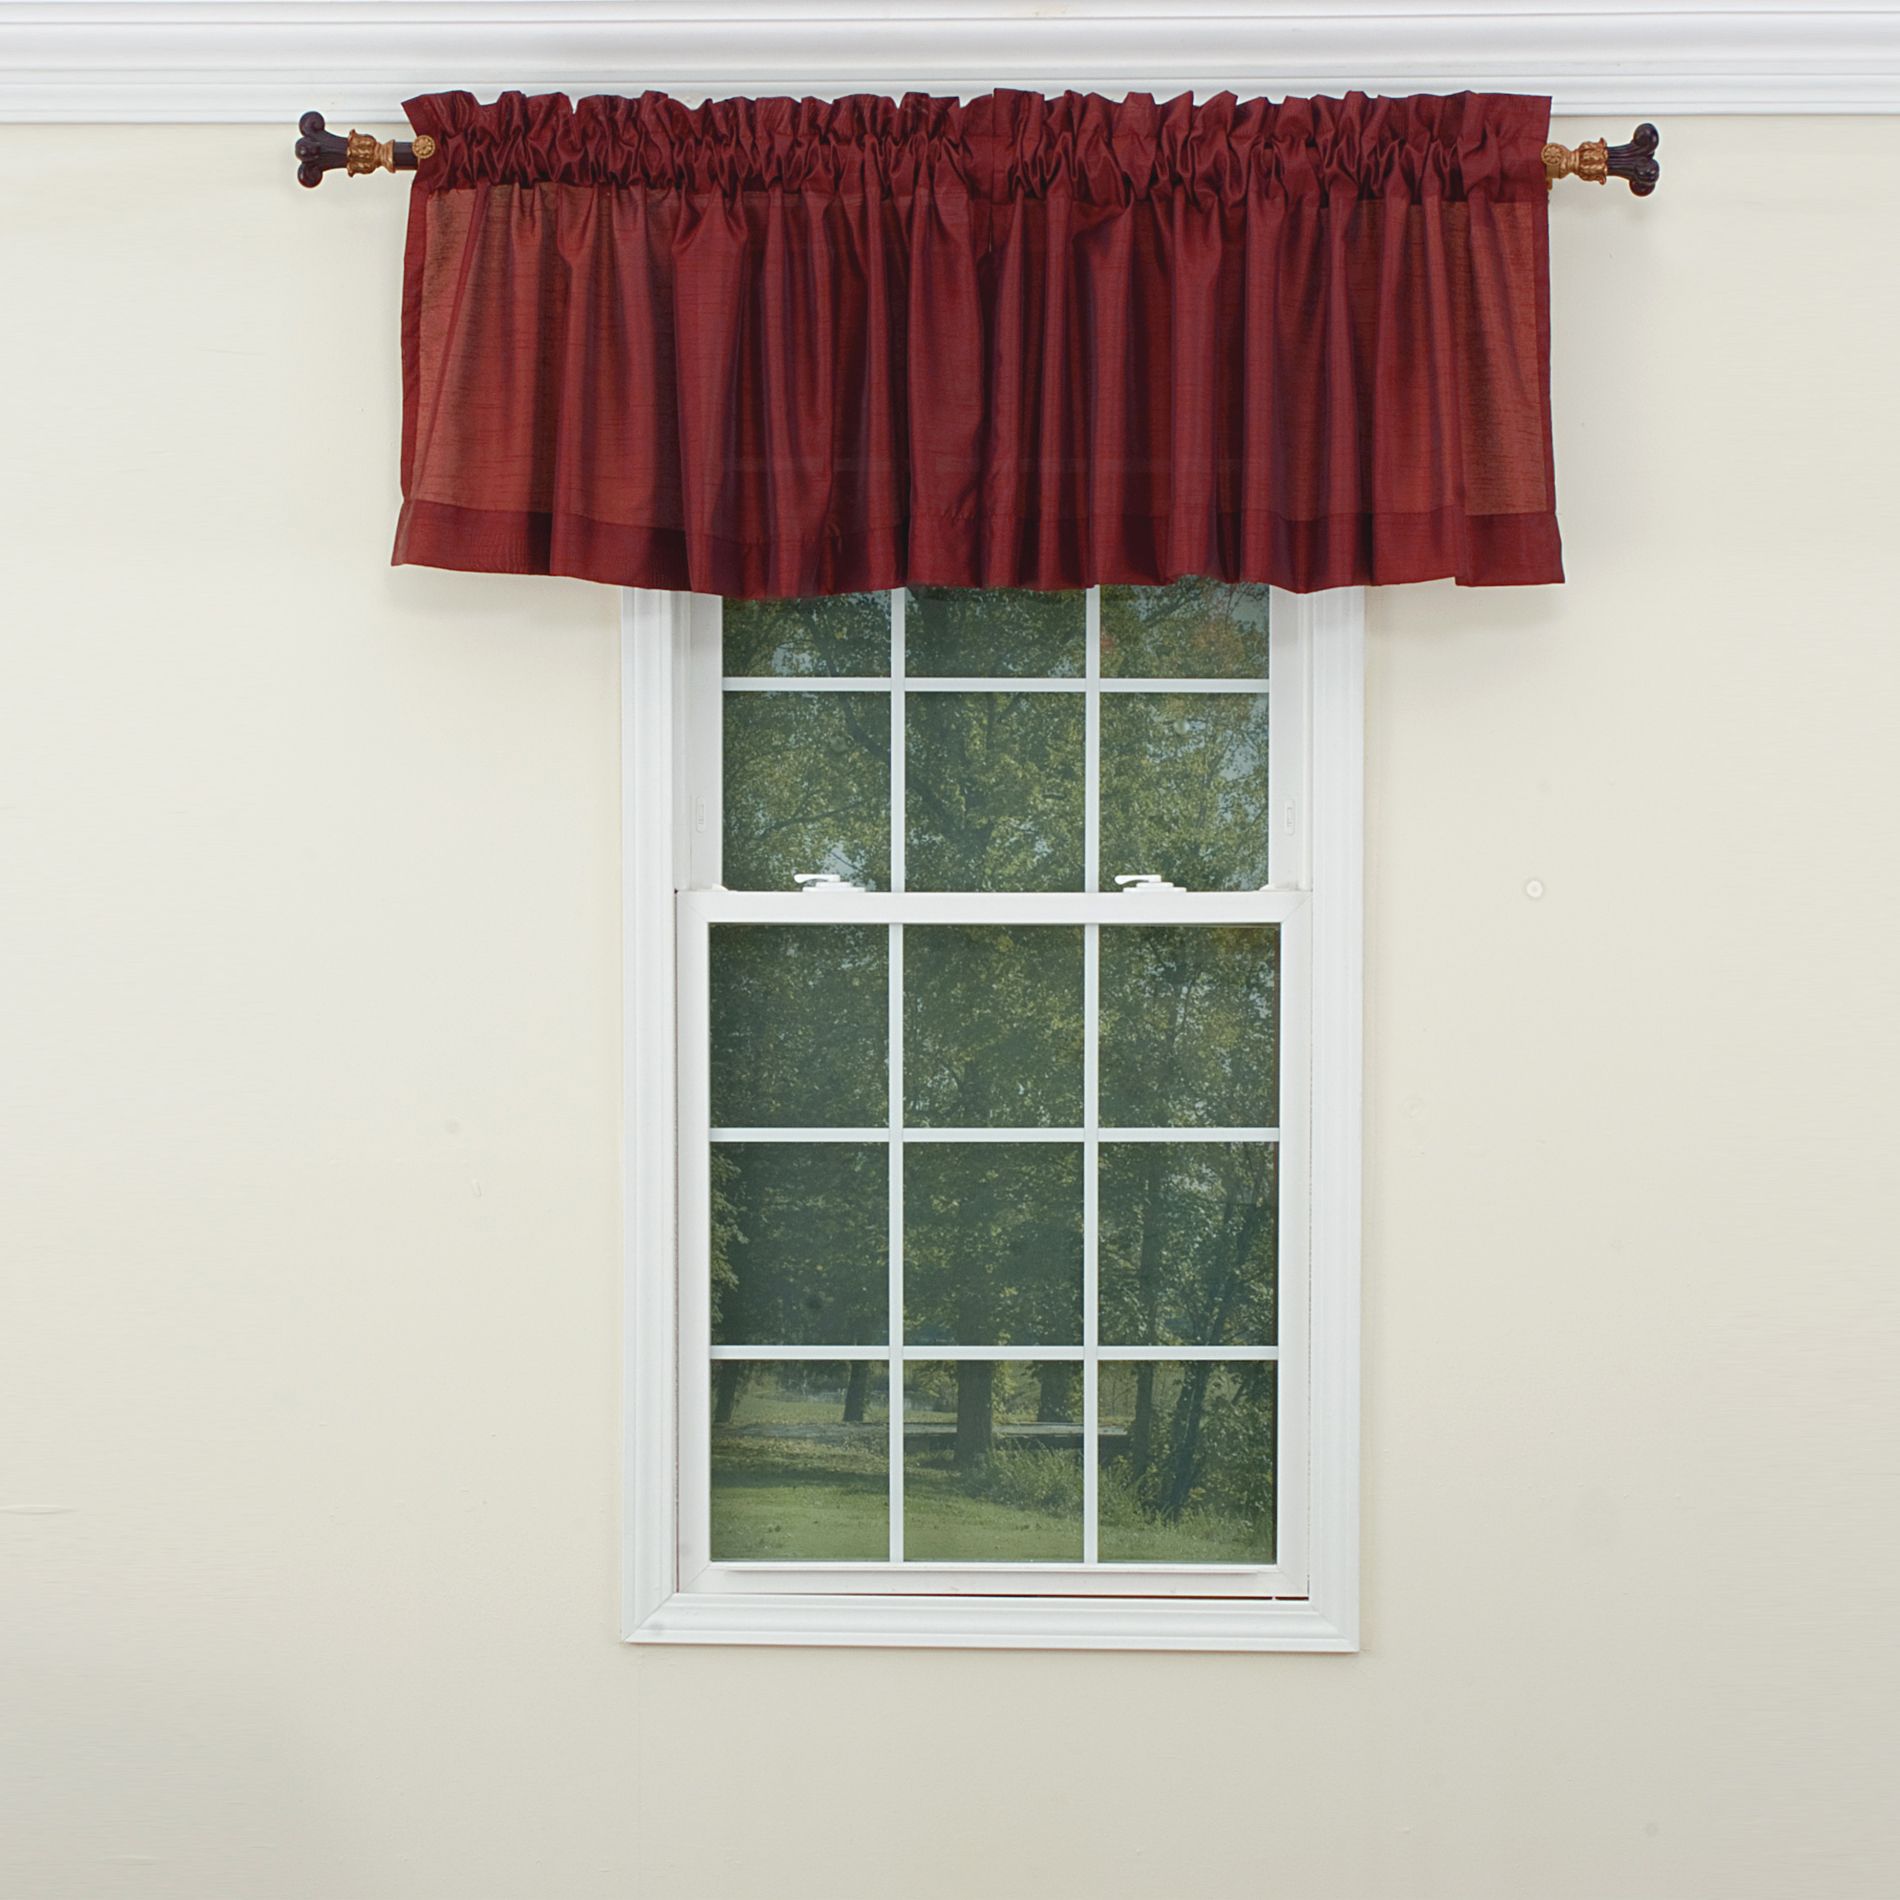 Colormate 54 in. x 20 in. Parker Faux Silk Valance